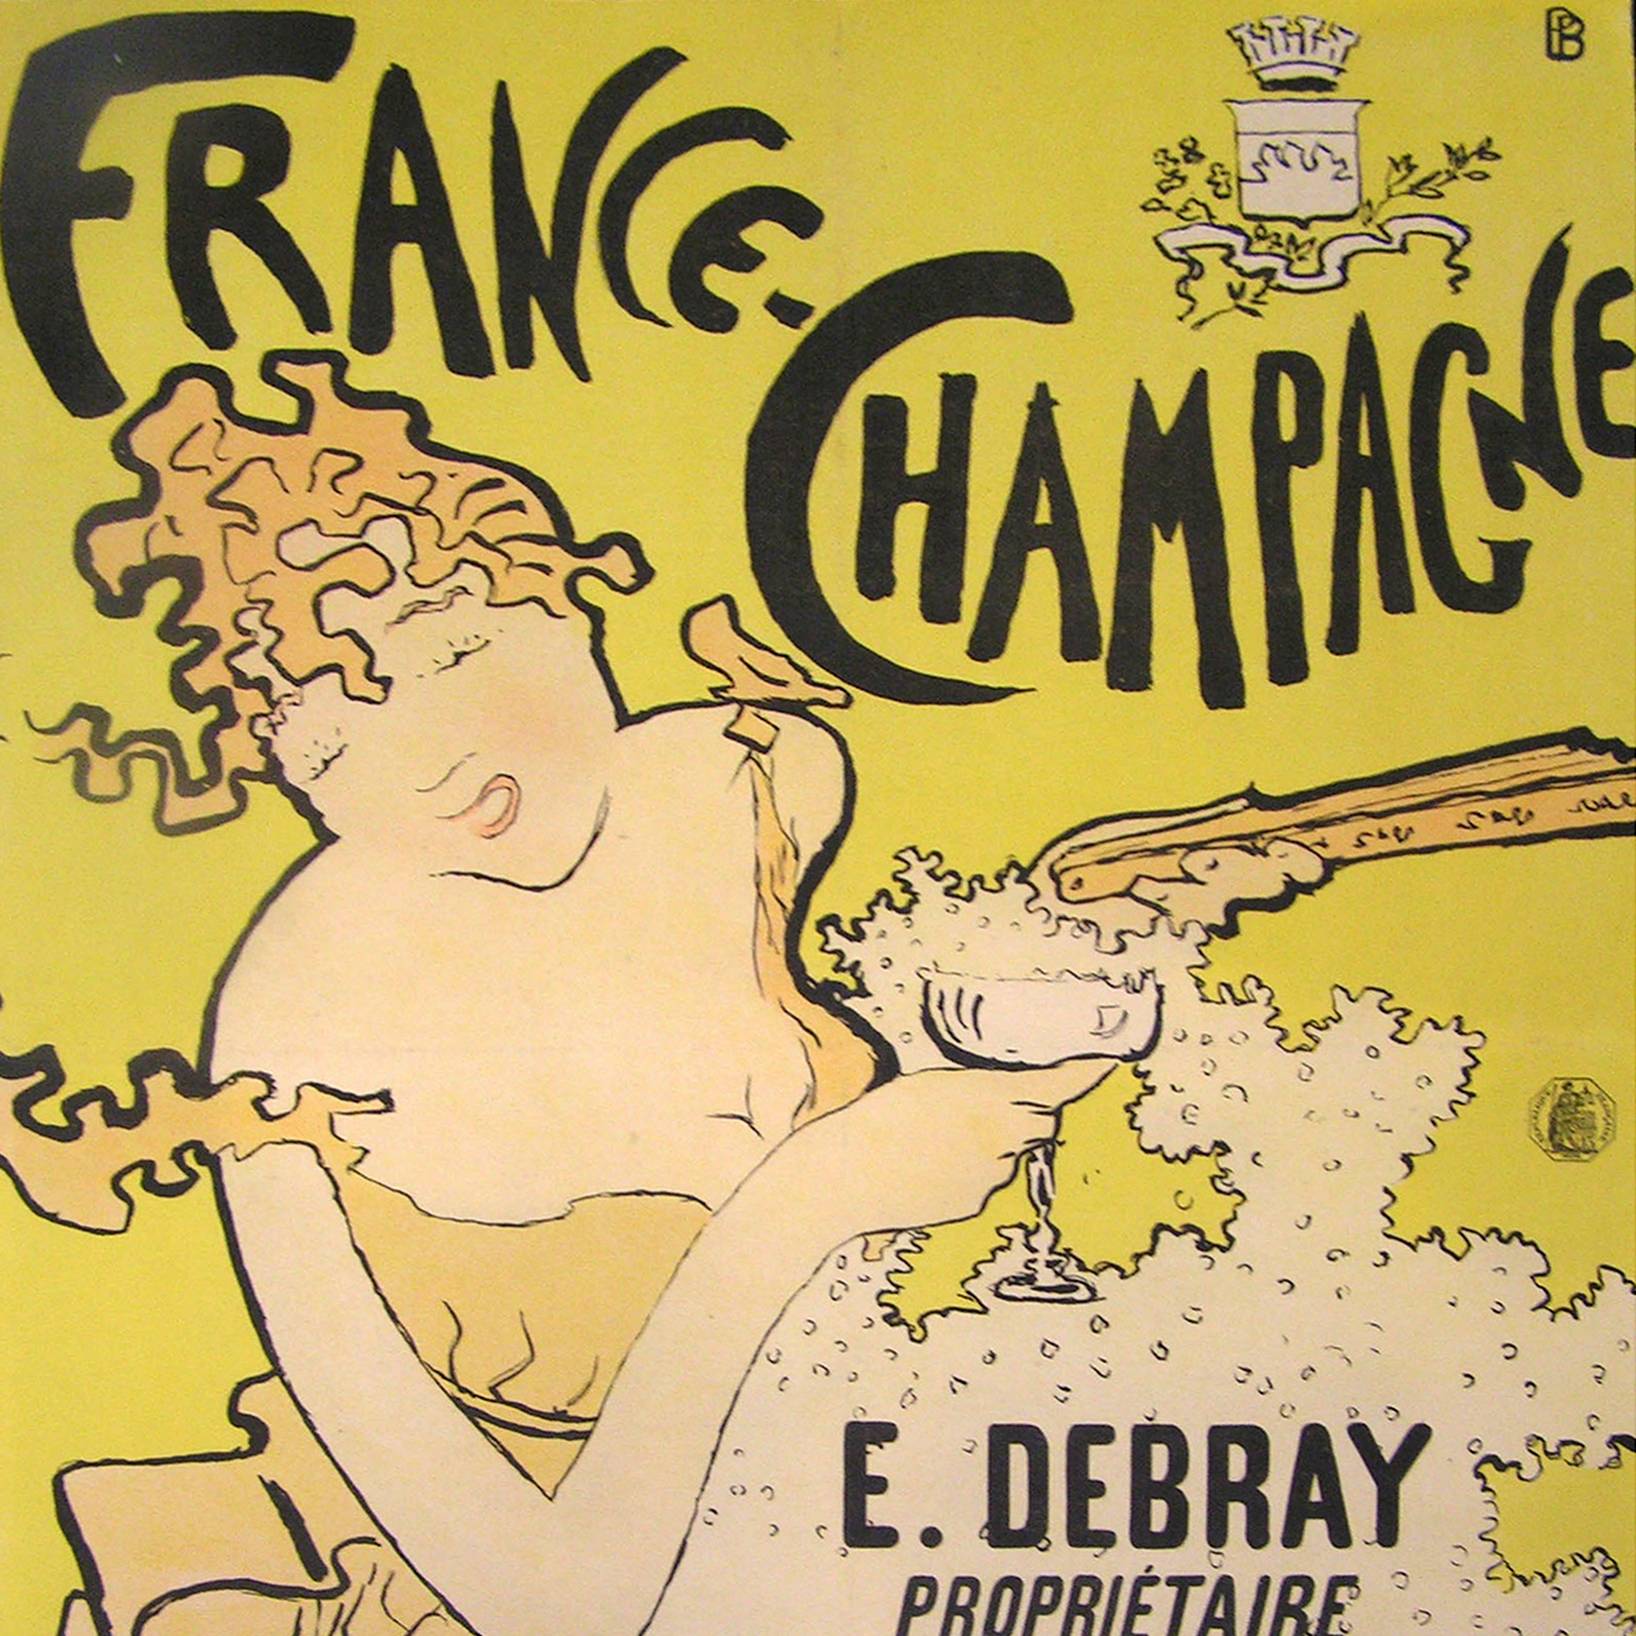 Woman with closed eyes holding fan and glass of champagne in front of yellow background and below text that reads "France Champagne"